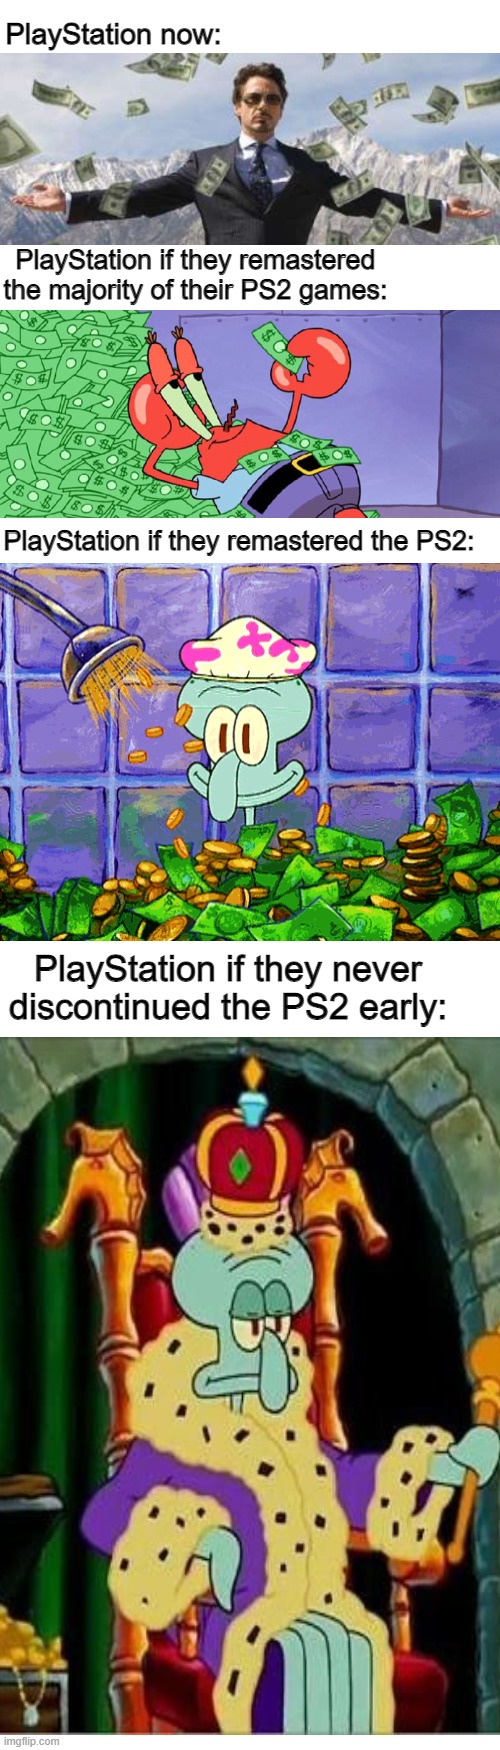 PlayStation and the PS2 | PlayStation now:; PlayStation if they remastered the majority of their PS2 games:; PlayStation if they remastered the PS2:; PlayStation if they never discontinued the PS2 early: | image tagged in ps2,playstation,video games,videogames,gaming,games | made w/ Imgflip meme maker